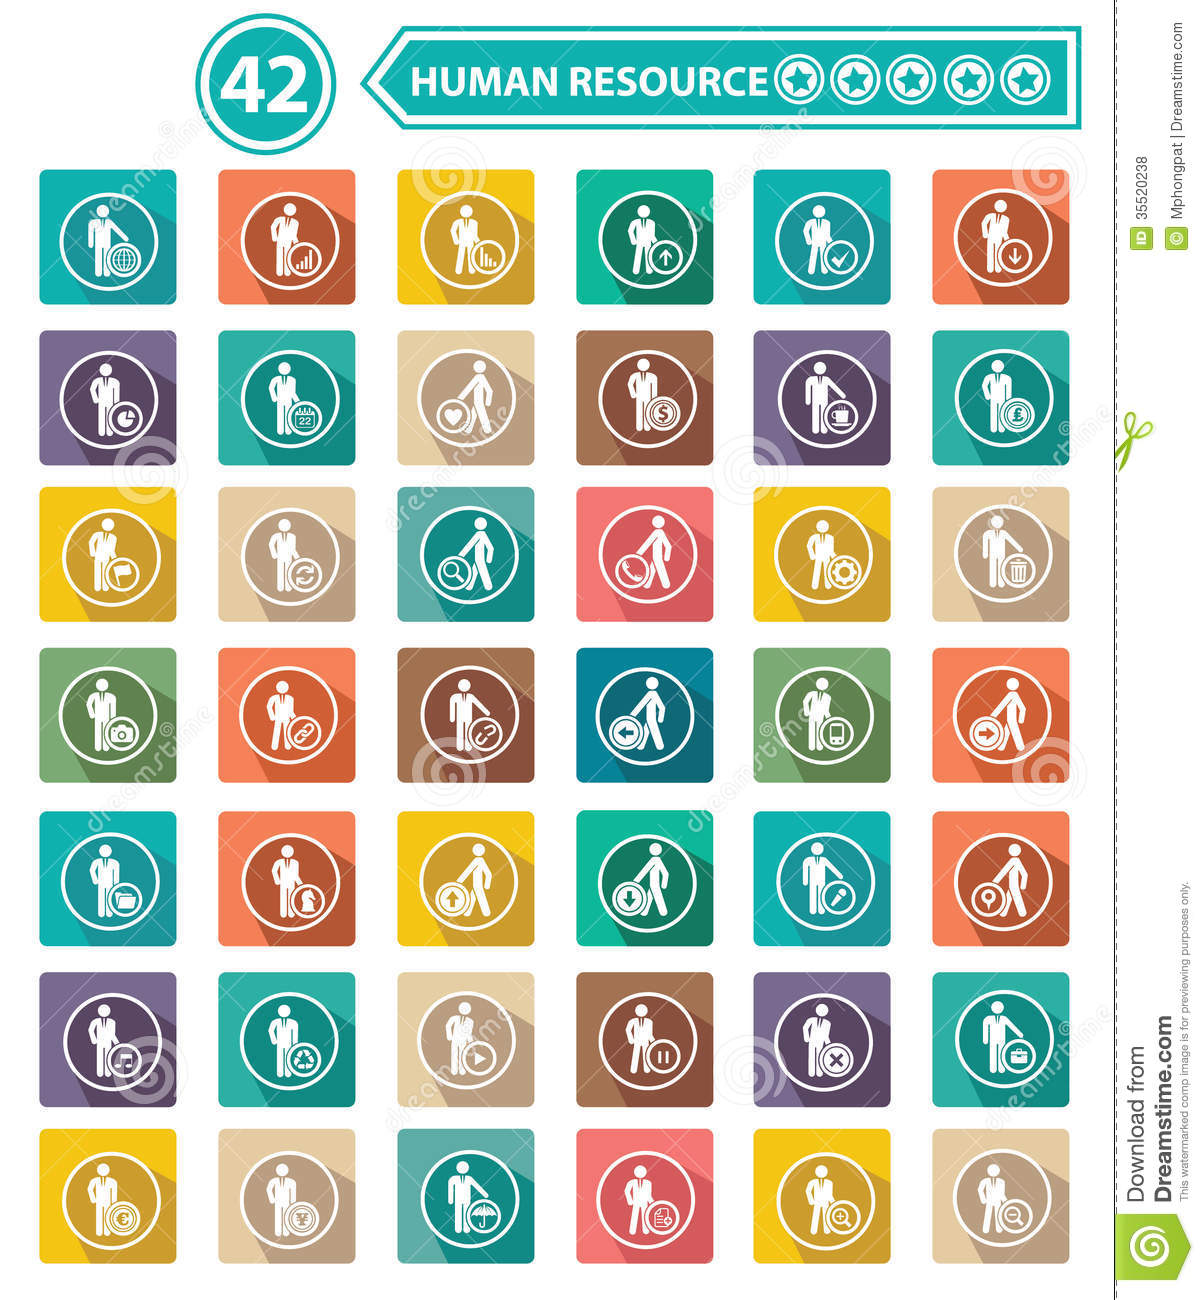 Human Resources Icons Free